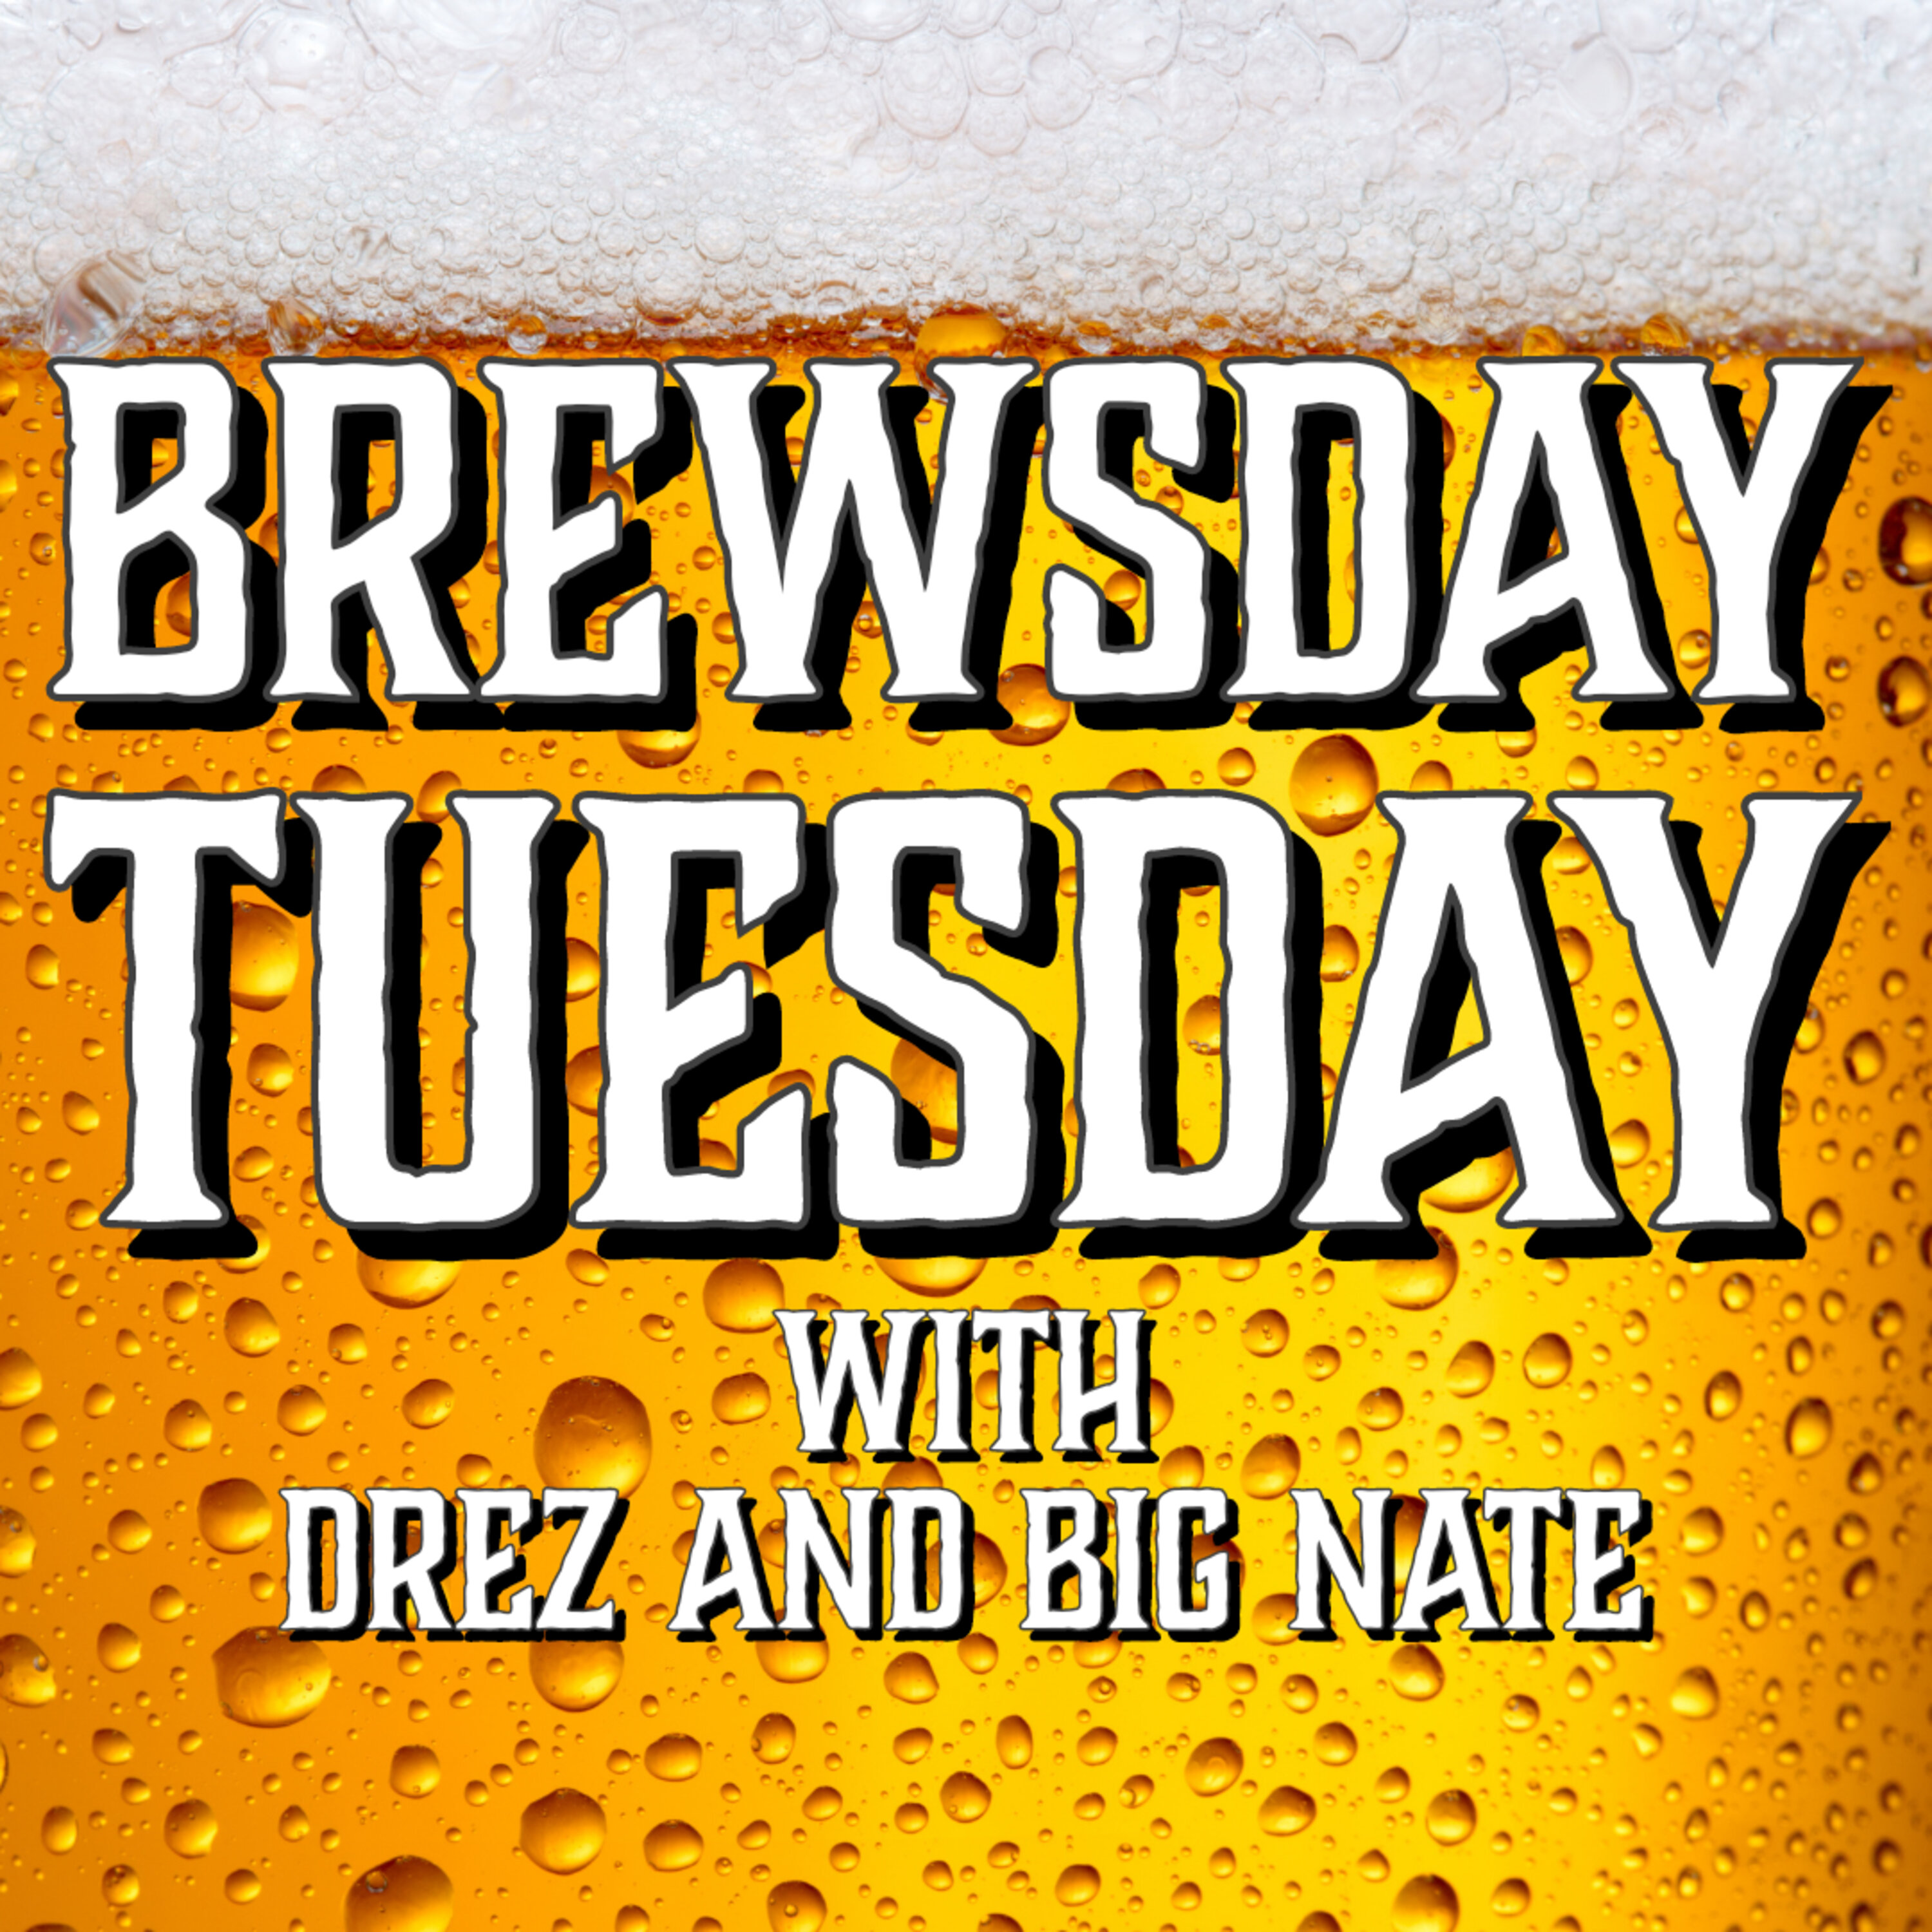 Brewsday Tuesday with DreZ and Big Nate